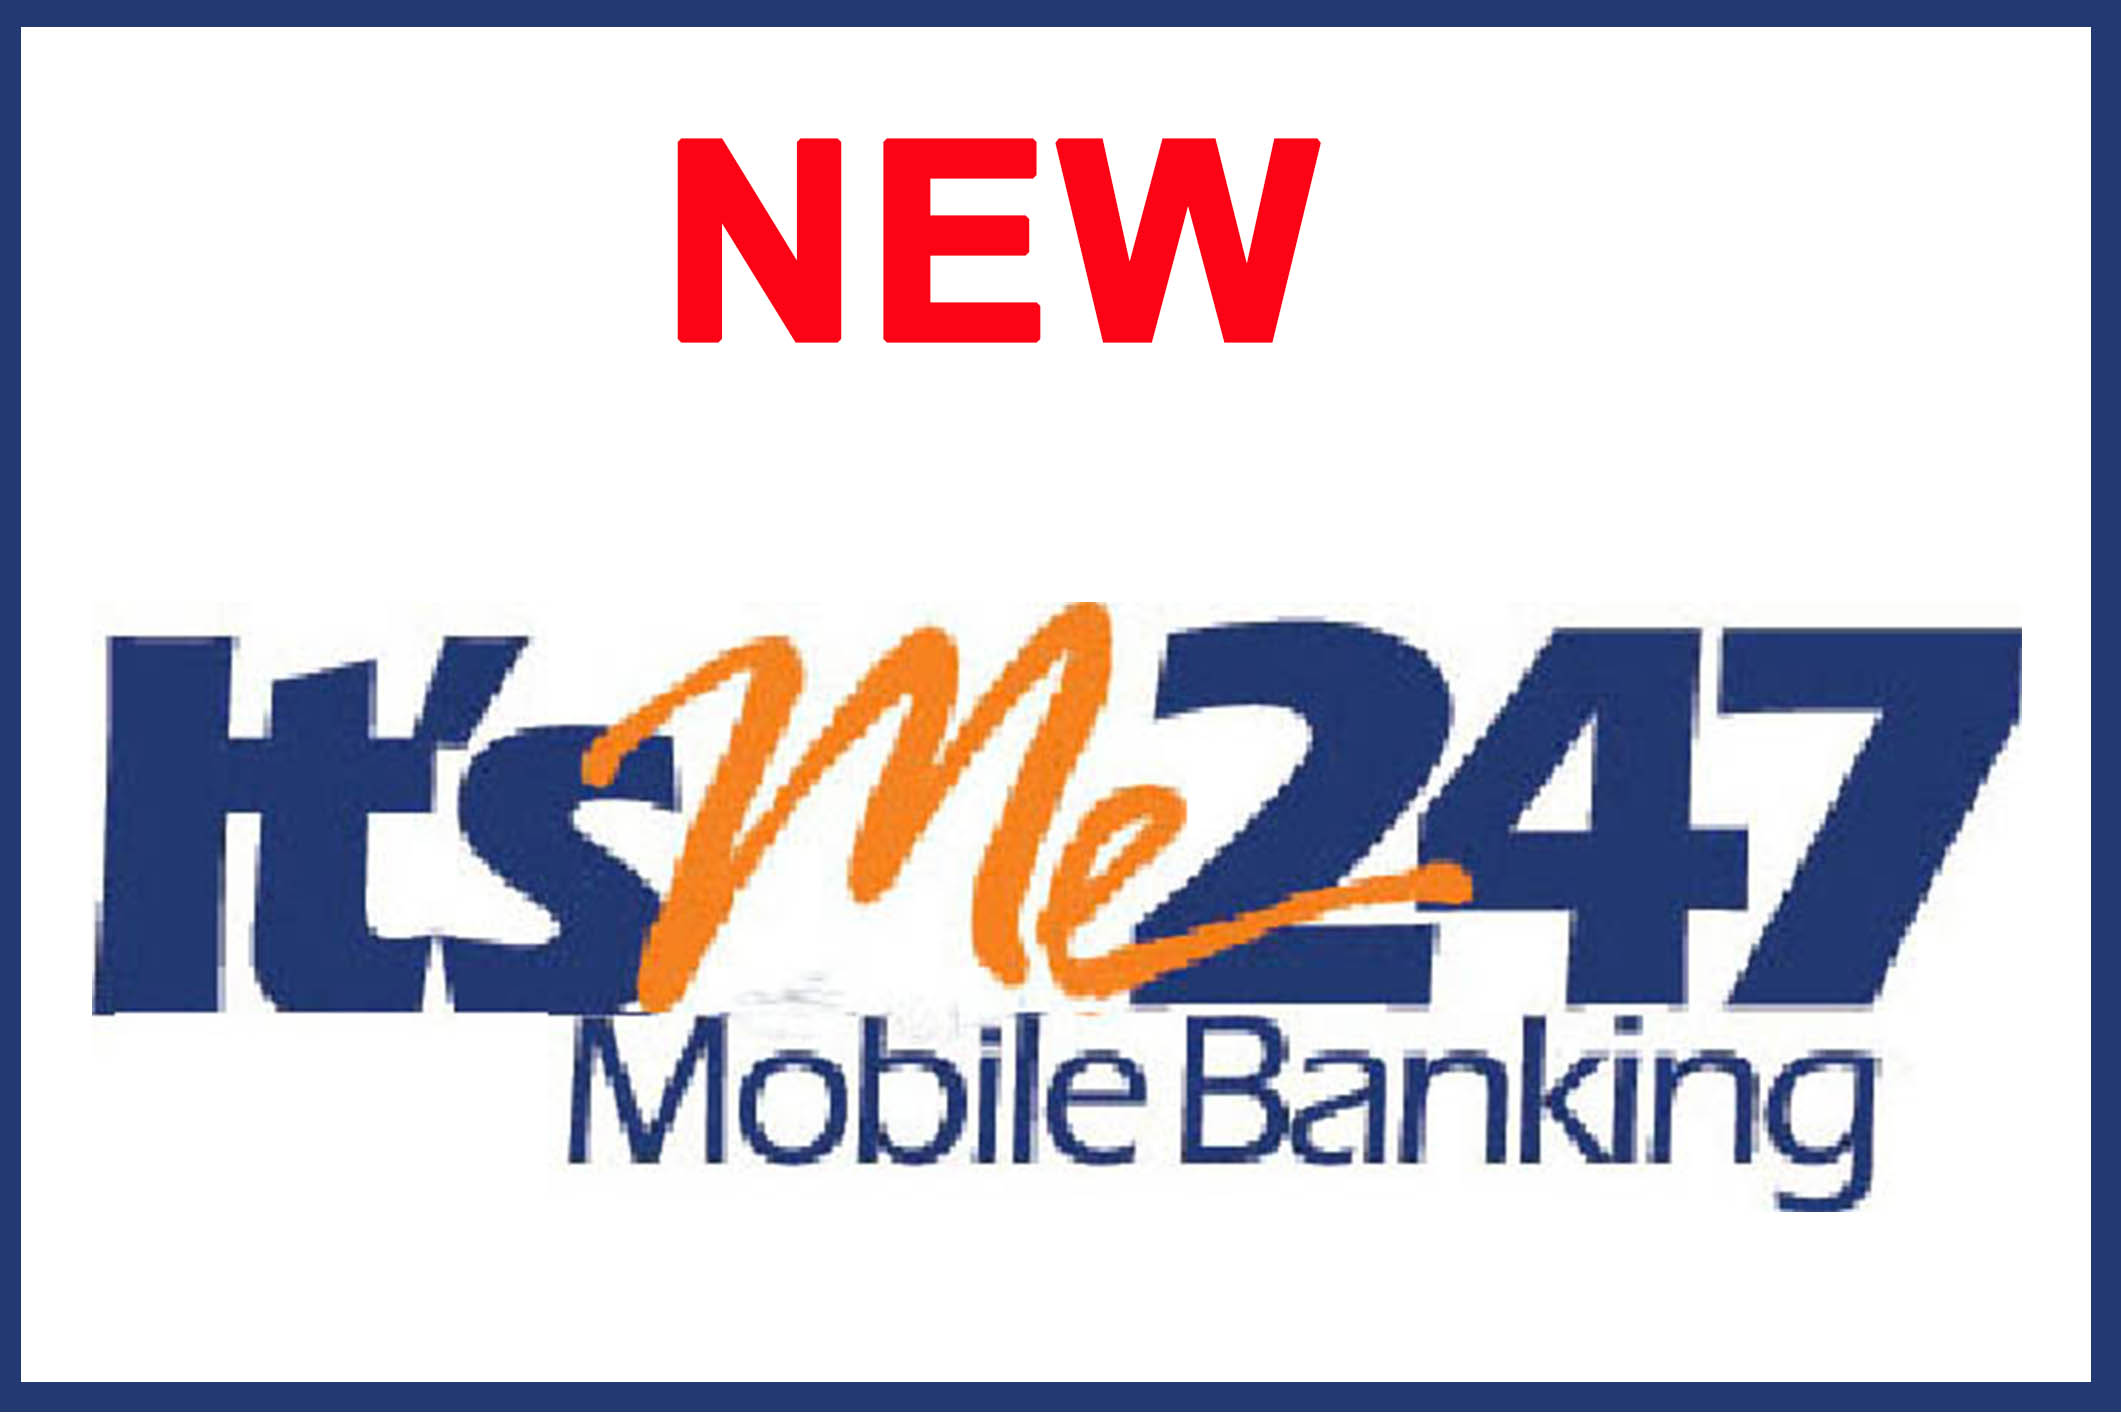 New Mobile Banking